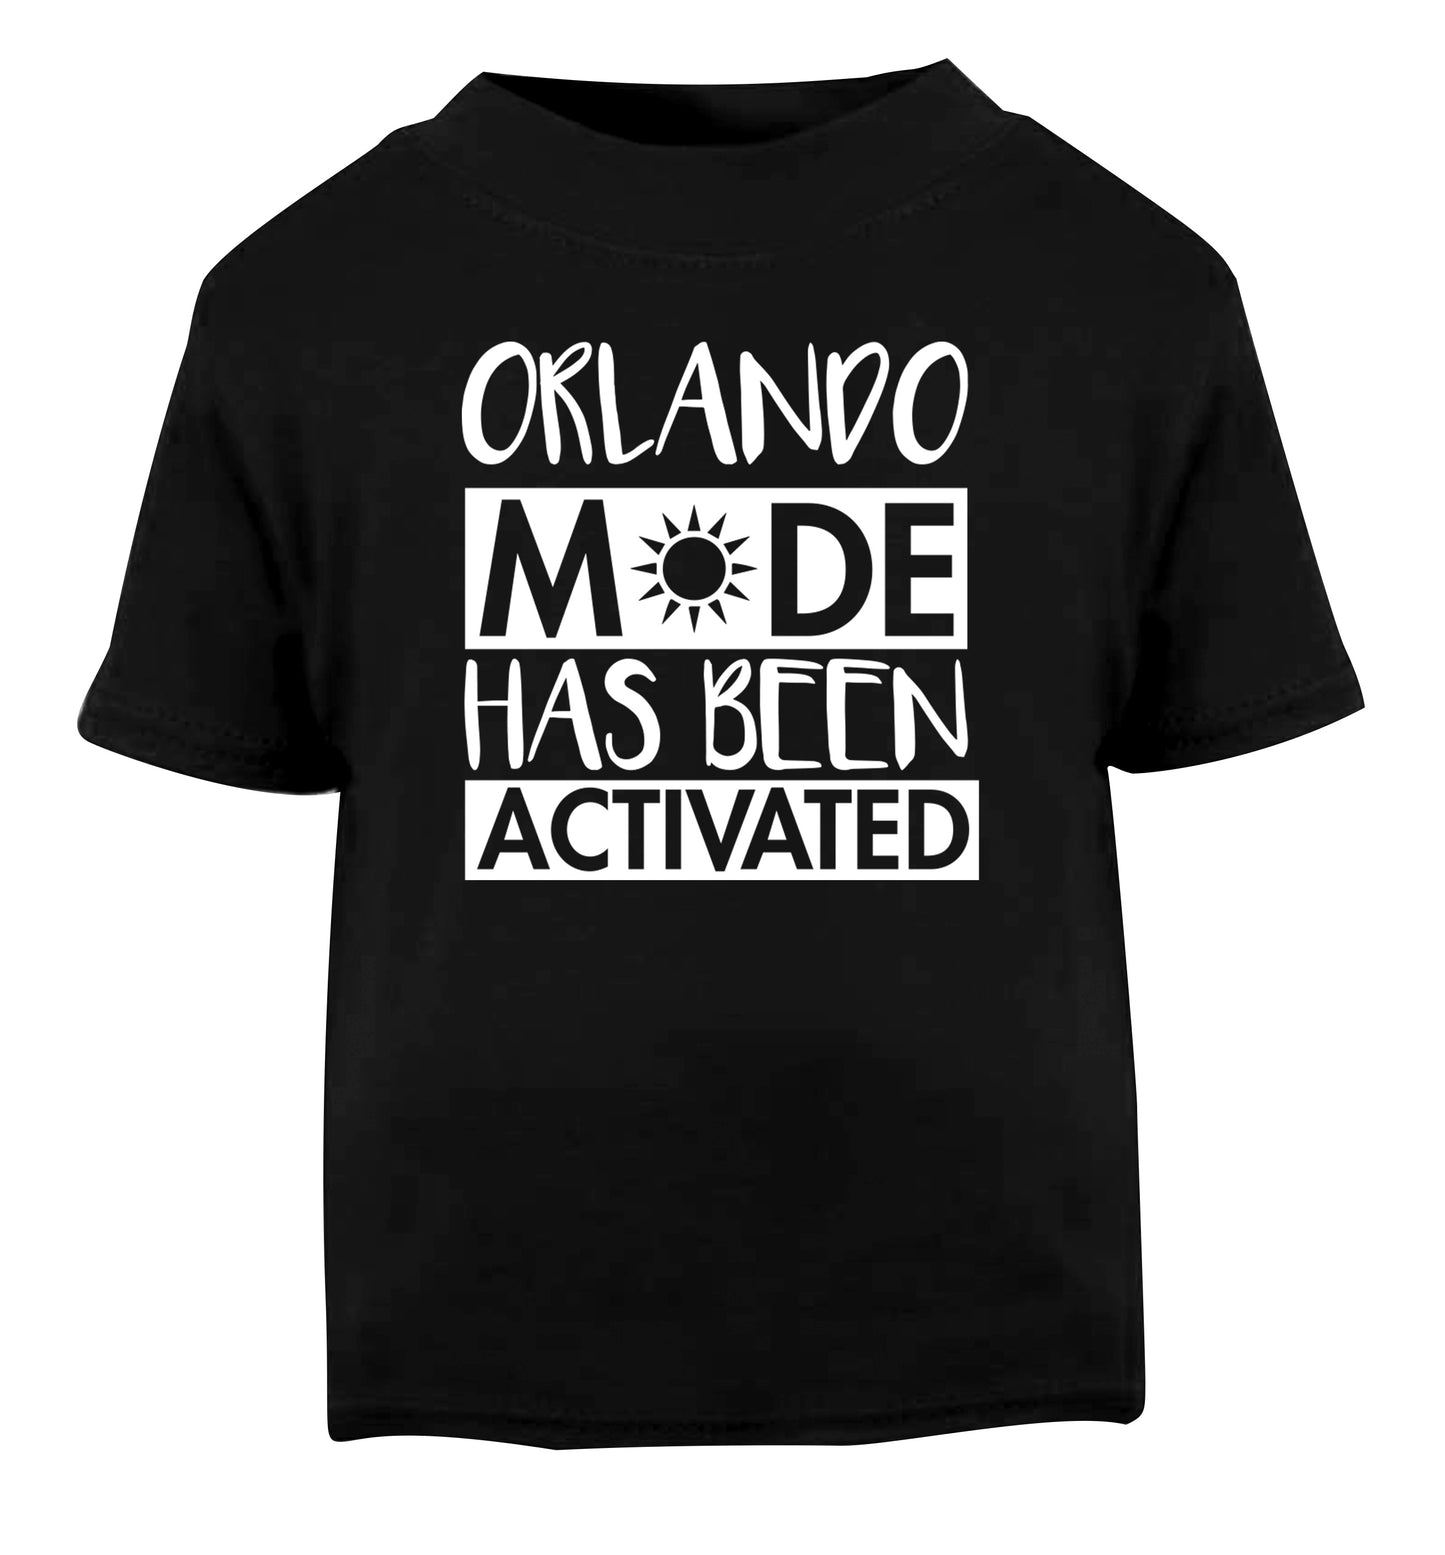 Orlando mode has been activated Black Baby Toddler Tshirt 2 years